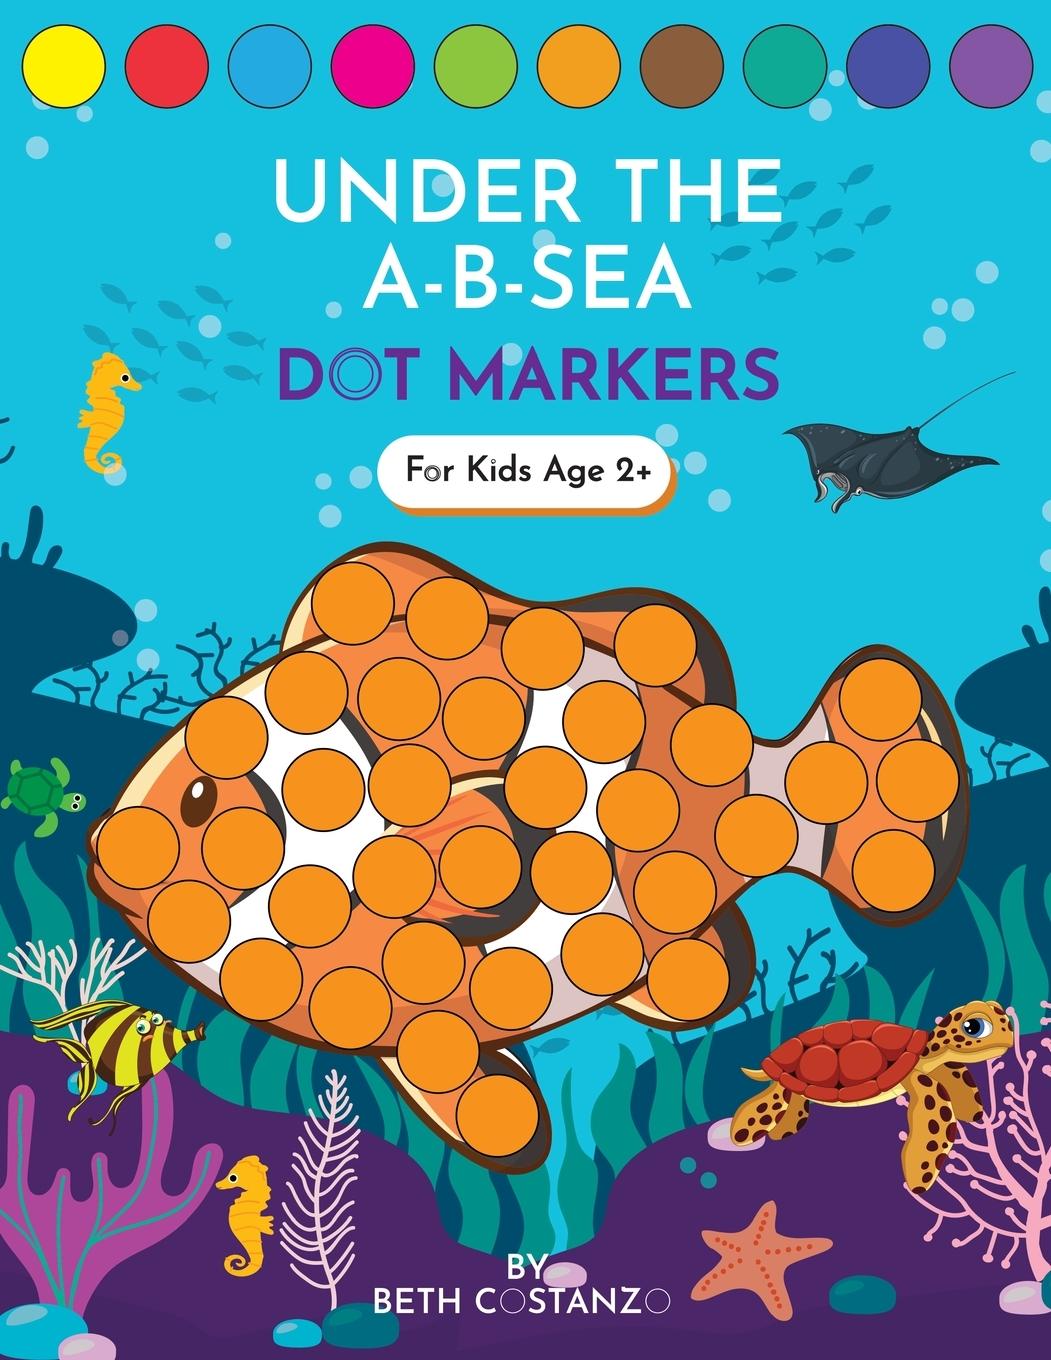 Book Dot Markers Activity Book! Under the A-B-Sea Learning Alphabet Letters ages 3-5 